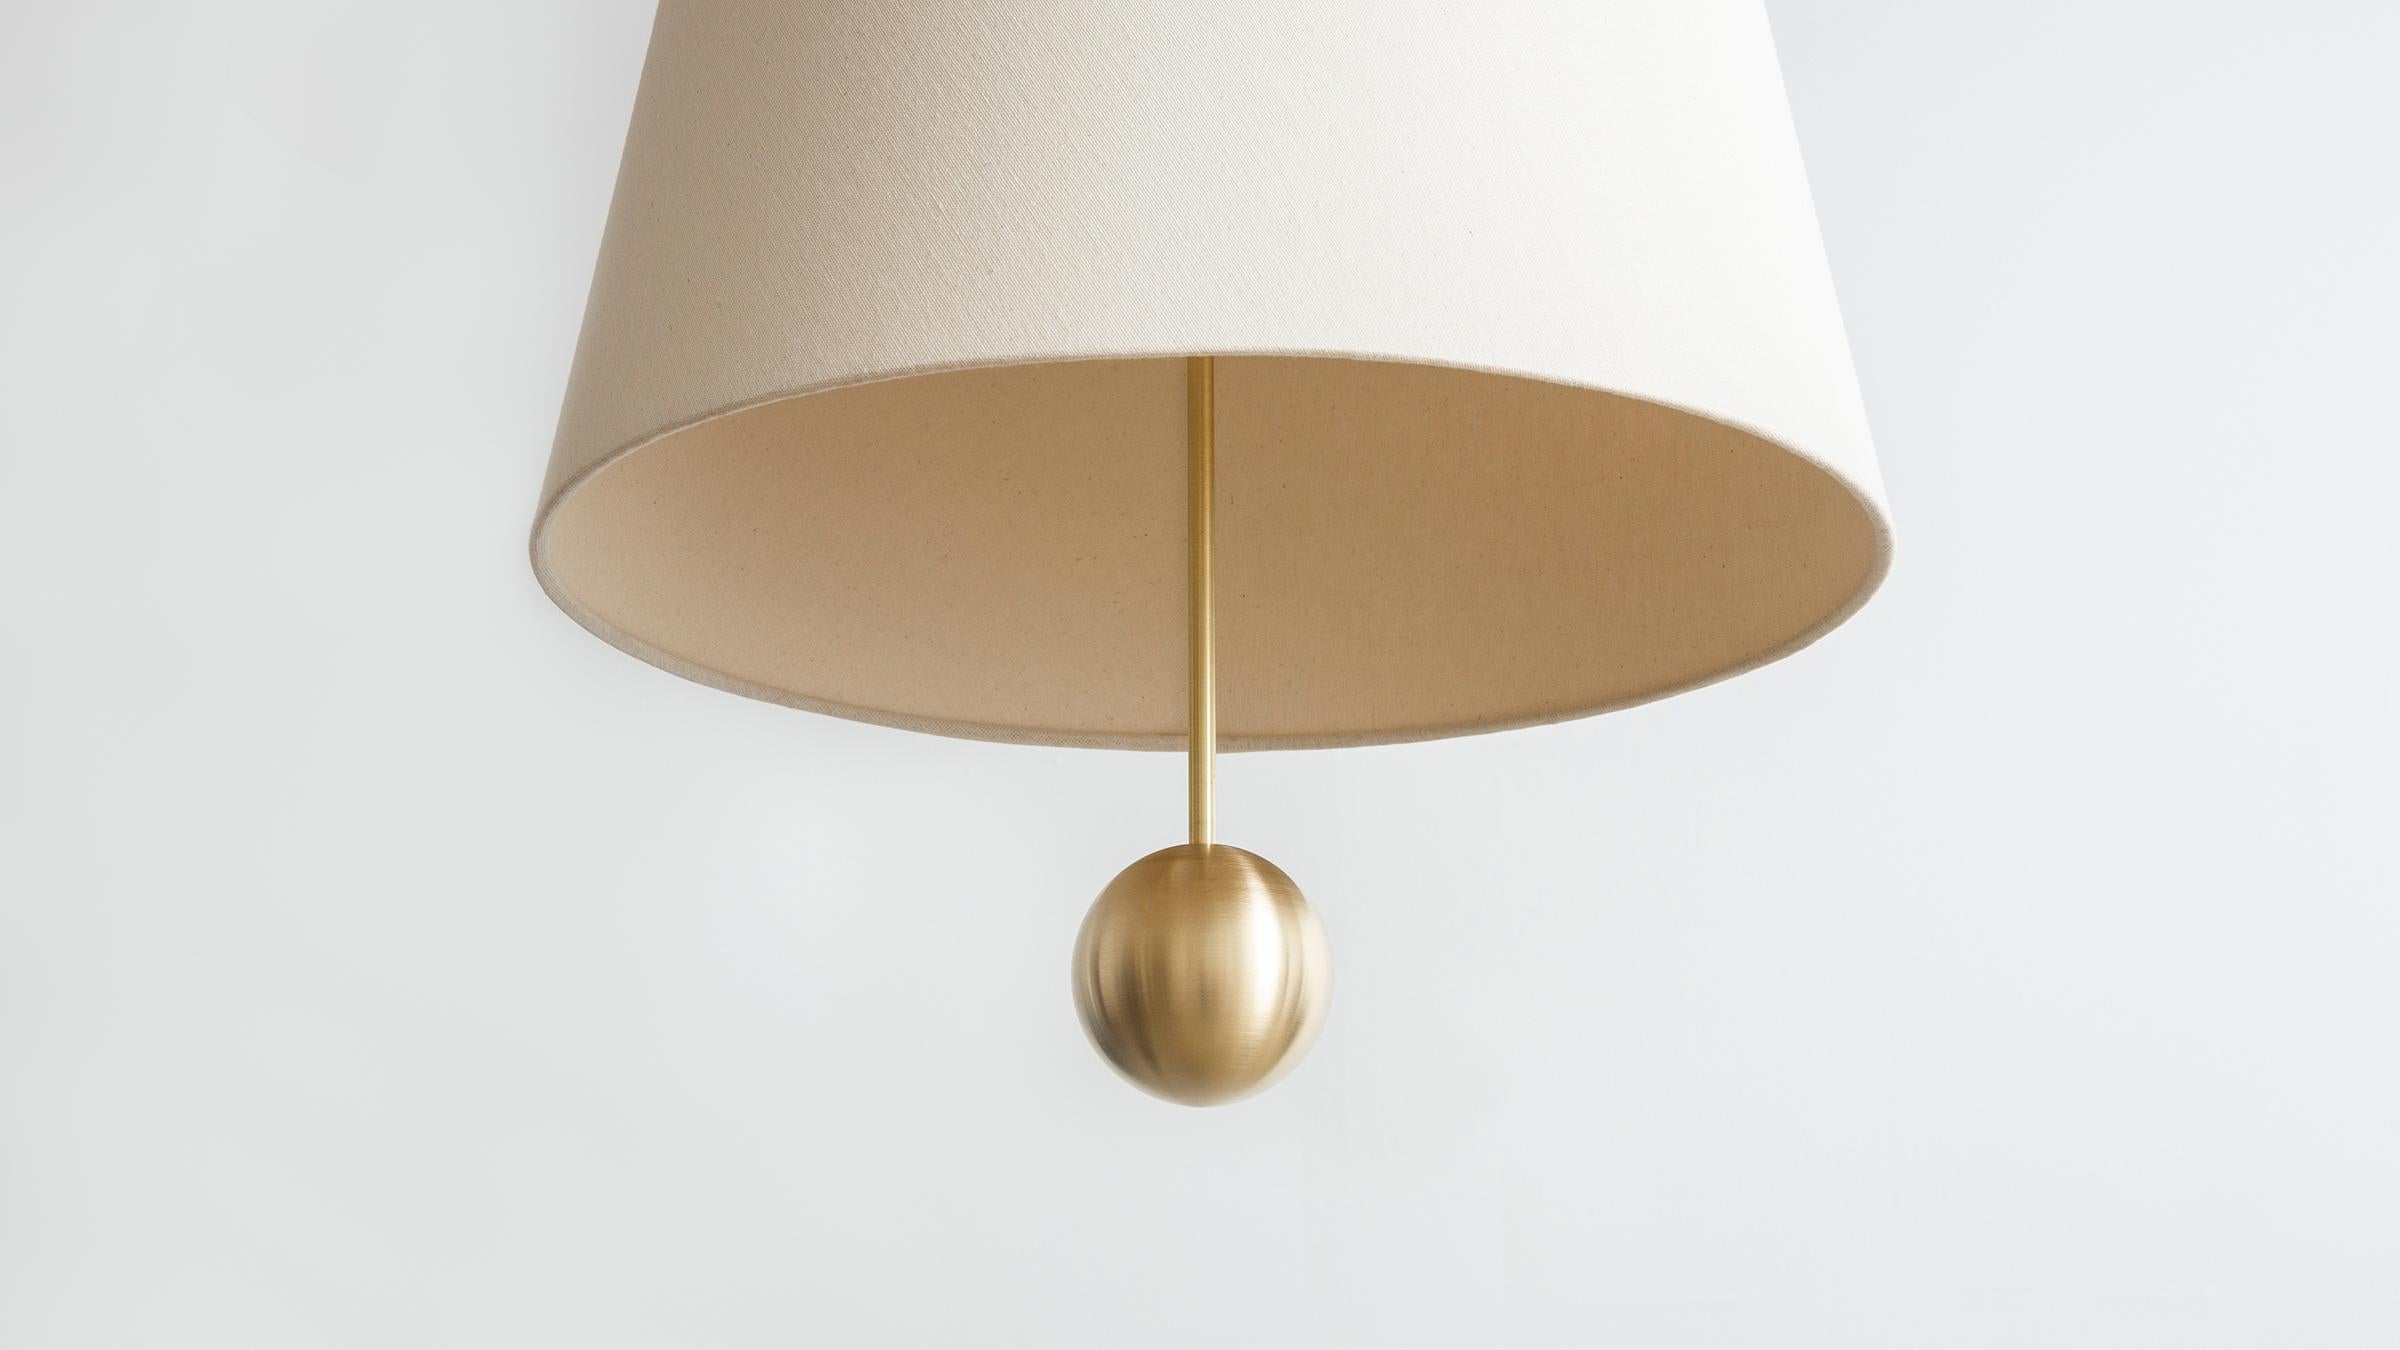 The house cord pendant large makes a bold statement via an iconic domestic form. Creating a graphic beam of light both above and below, the shade’s interior and exterior is swathed in natural linen. An oversized metal ball drops beneath the fabric